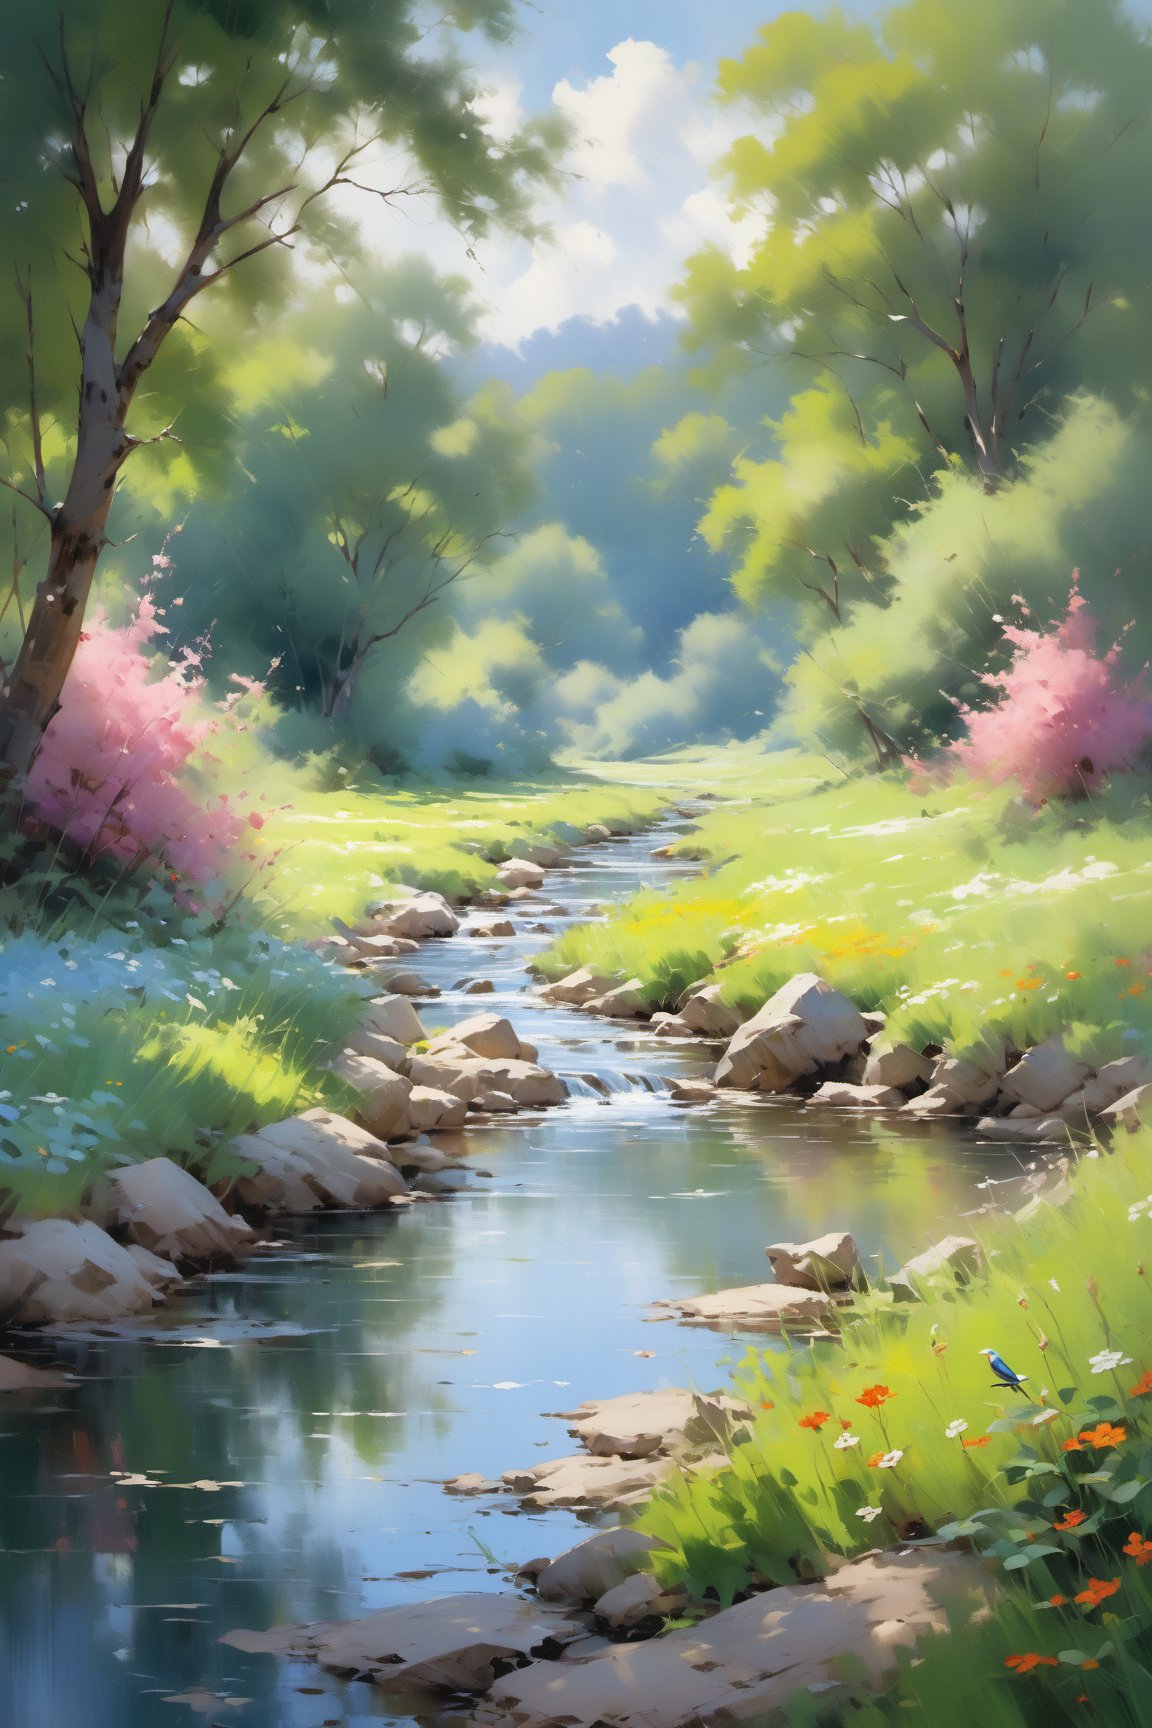 oil paint, nature (best quality,4k,8k,highres,masterpiece:1.2),ultra-detailed,(realistic,photorealistic,photo-realistic:1.37),vivid colors,sharp focus,beautiful detailed eyes,beautiful detailed lips (if there are characters),sunlit meadow with vibrant flowers, lush green grass and rolling hills, a gentle breeze rustling the leaves of the trees, a crystal-clear blue sky with fluffy white clouds, a peaceful stream winding through the landscape, an abundance of wildlife including birds, butterflies, and small animals, sunlight filtering through the branches creating dappled shadows, the sound of birds chirping in the distance, a picturesque setting that evokes a sense of tranquility and beauty, the harmony of nature captured in every brushstroke, the vibrant colors of the flowers bringing the painting to life, the texture of the oil paint adding depth and richness to the artwork, the meticulous level of detail capturing the intricate beauty of the natural world.